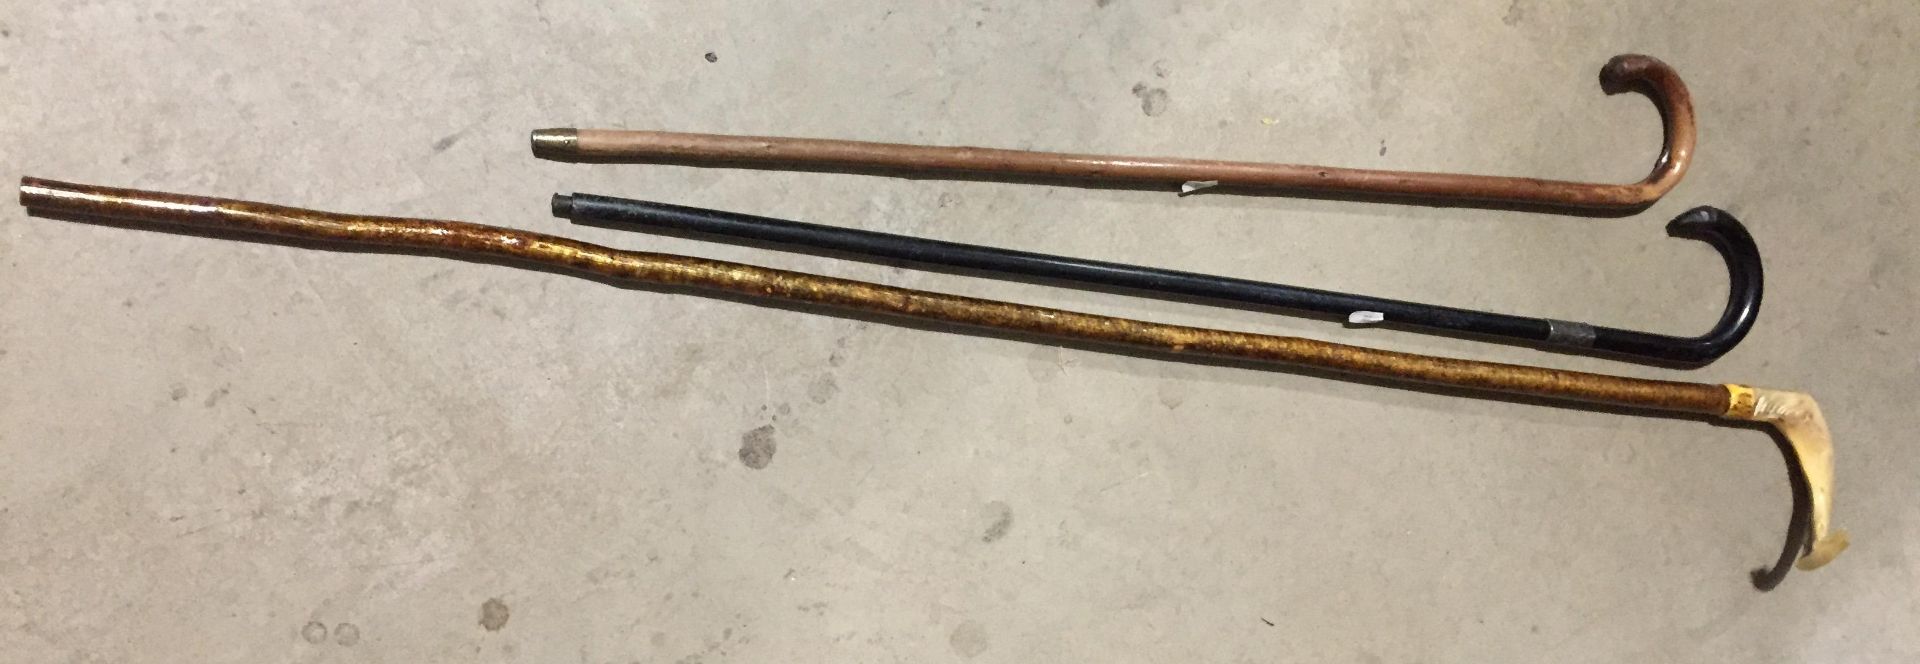 3 Items - ebonised walking stick with si